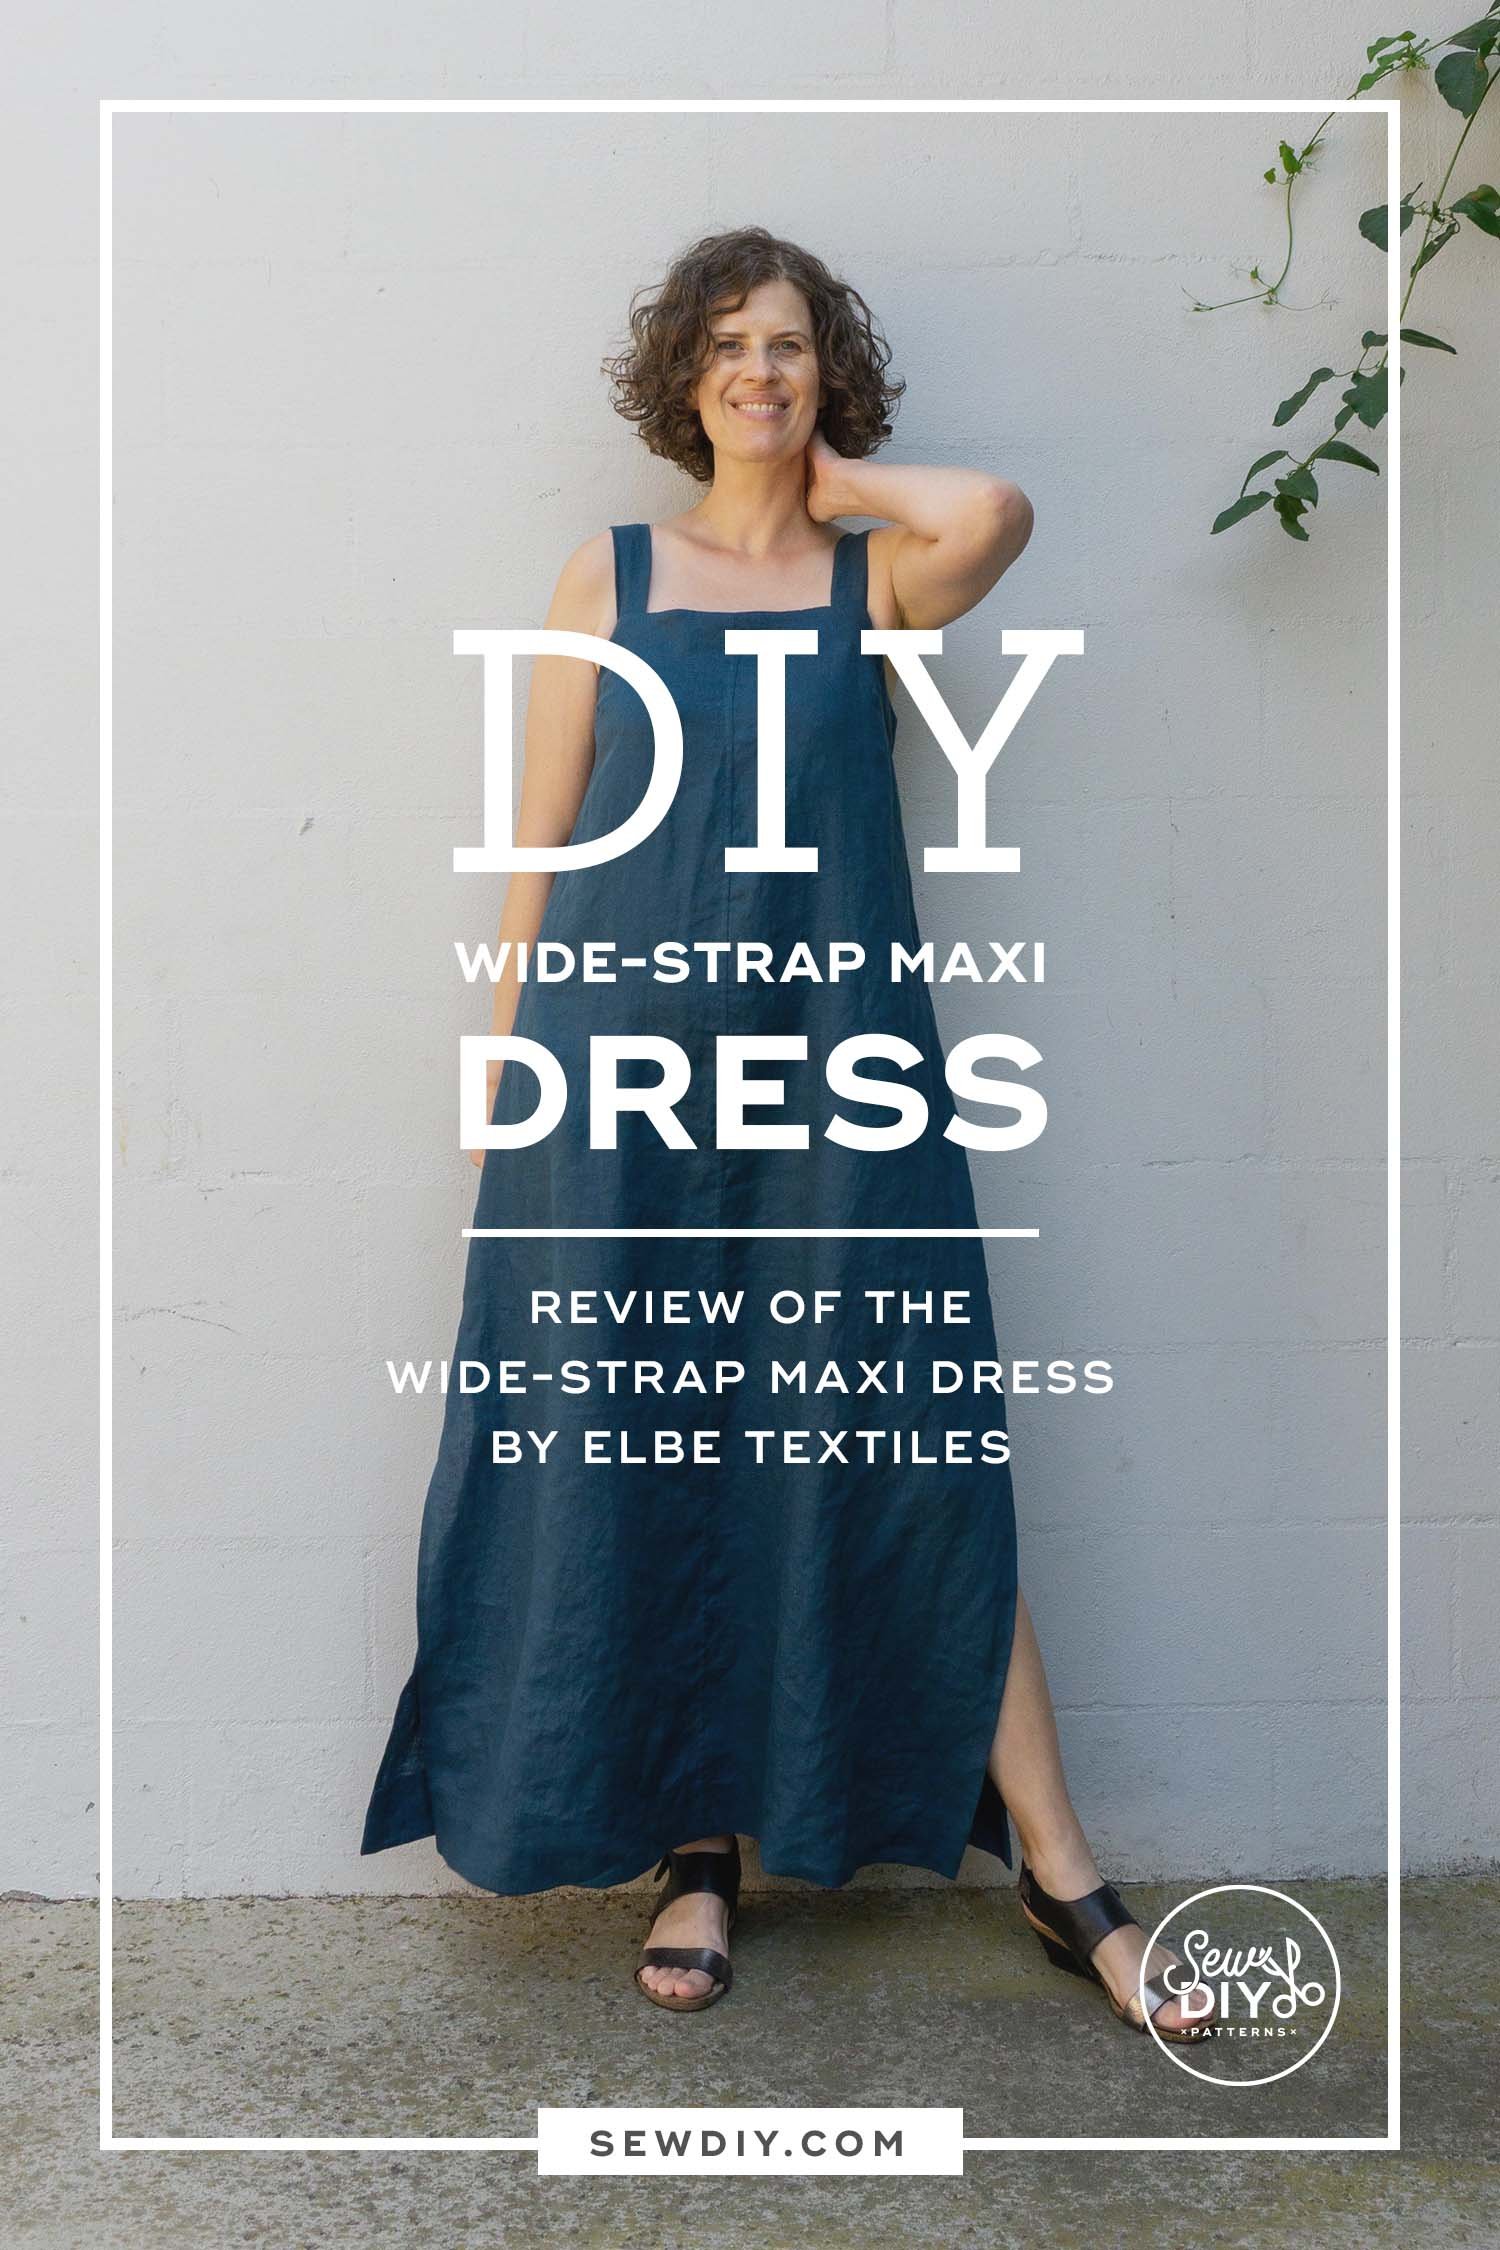 DIY Linen Maxi Dress—Review of the Wide-Strap Maxi Dress by